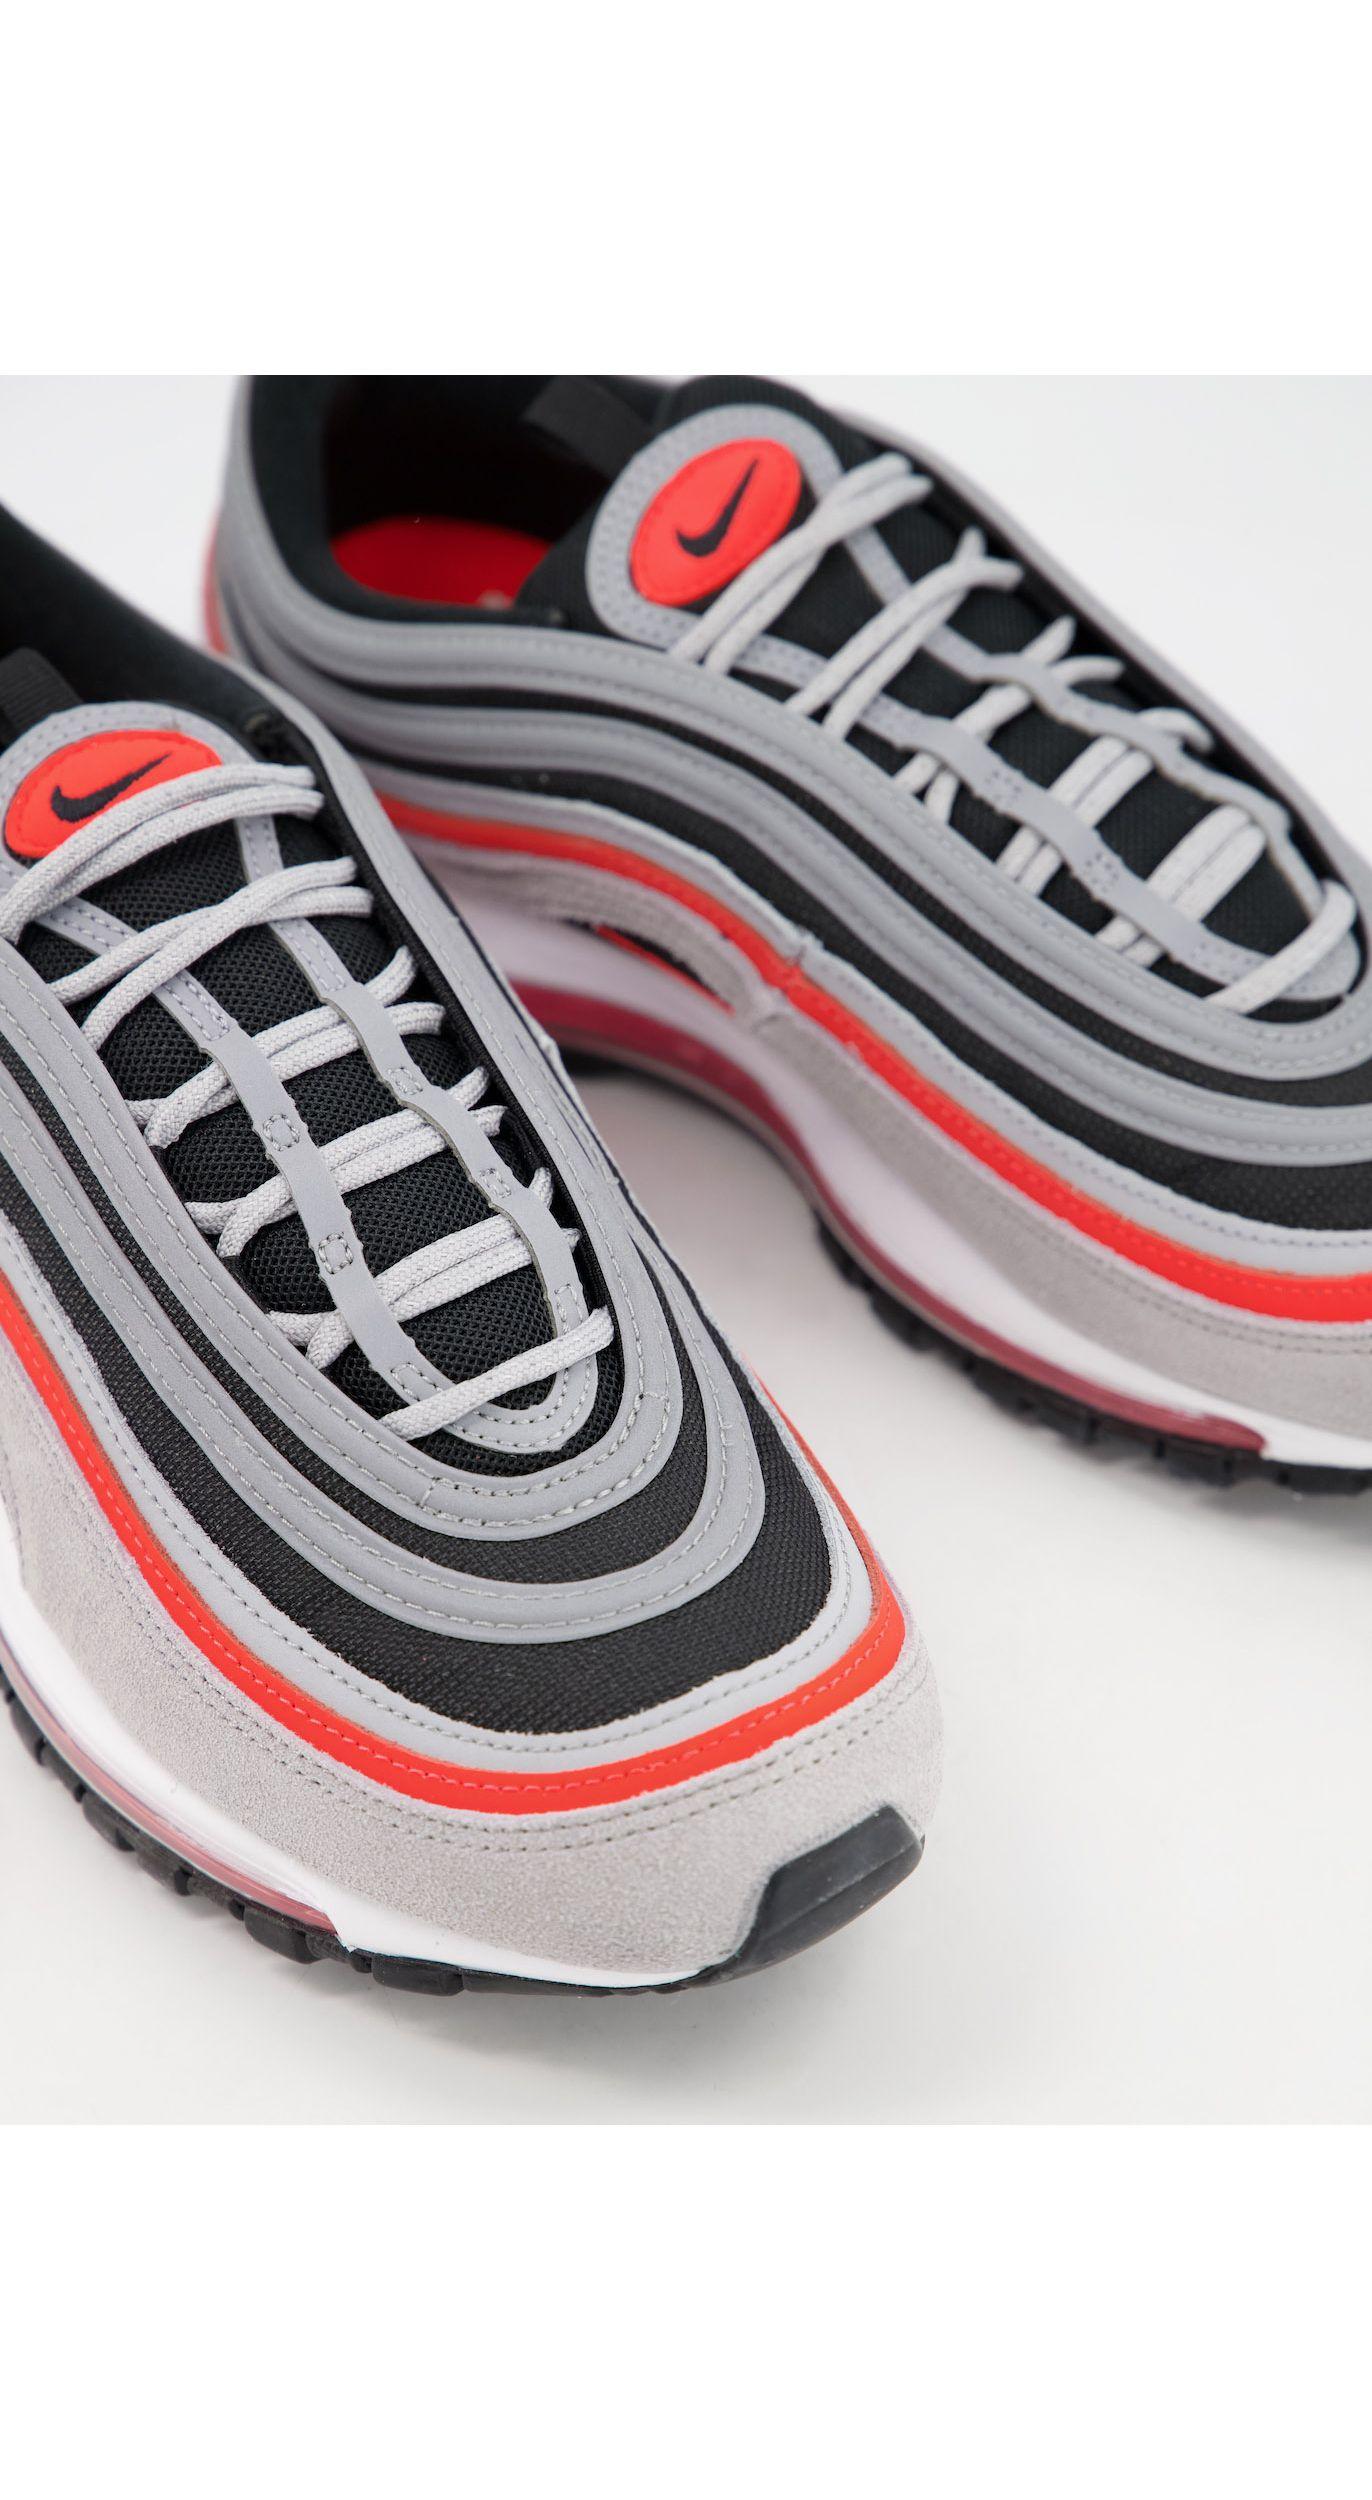 Nike Air Max 97 Homme Grise Factory Sale, 55% OFF | evanstoncinci.org